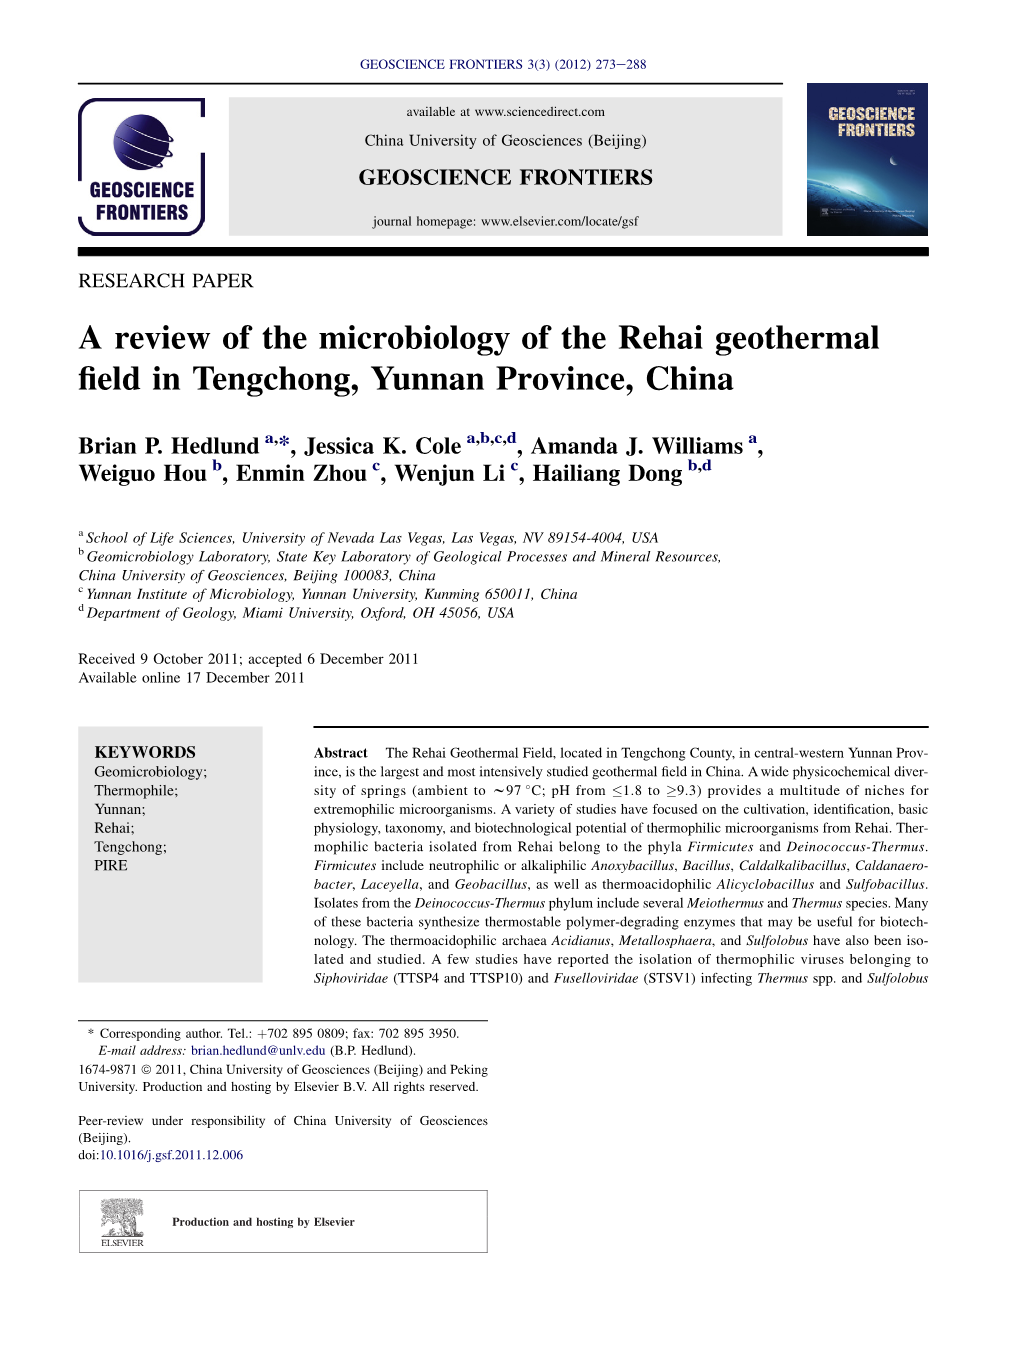 A Review of the Microbiology of the Rehai Geothermal Field In